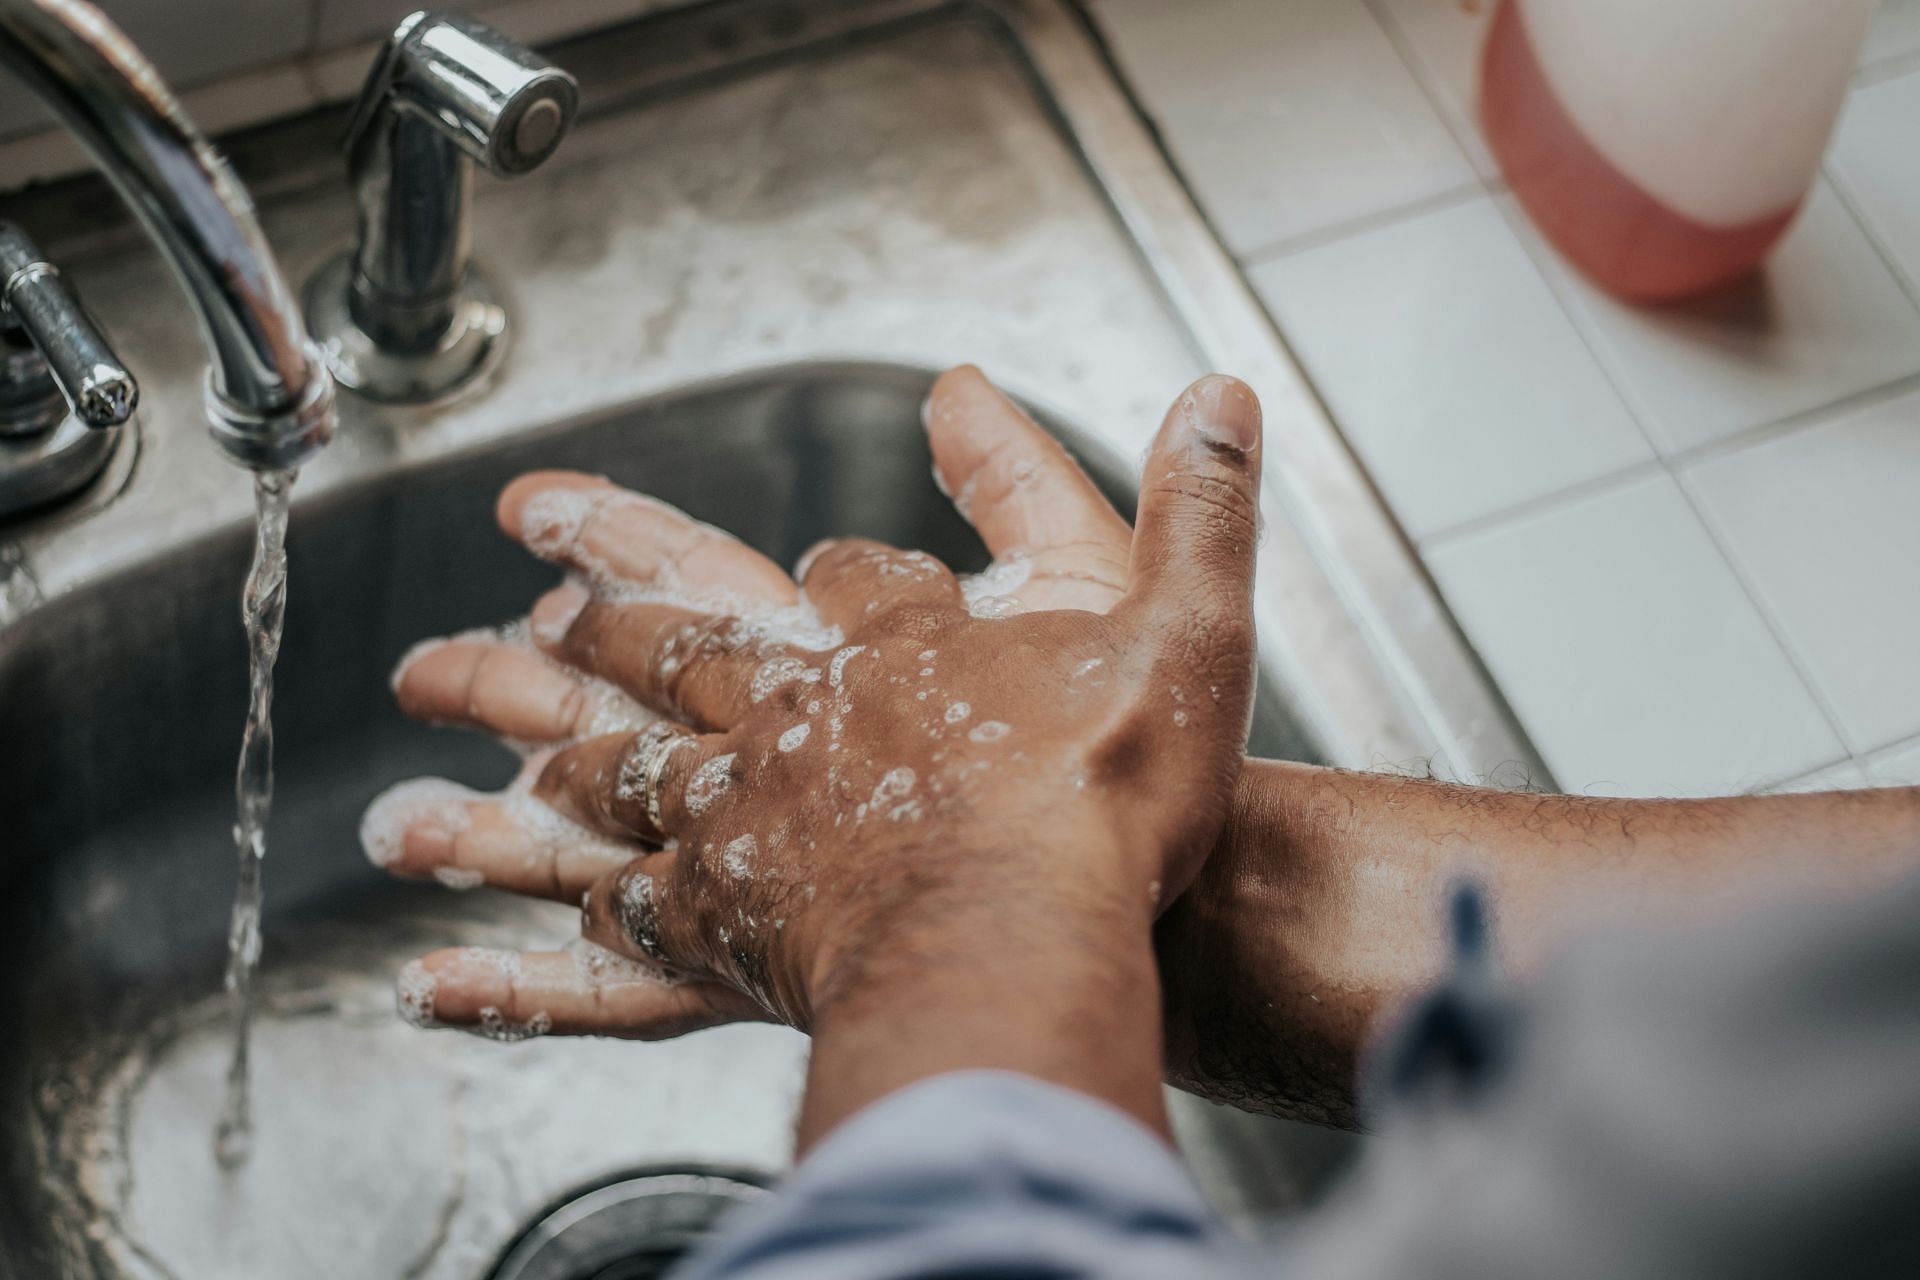 Wash your hands and prevent any source of contamination (Image by Melissa Jeanty/Unsplash)